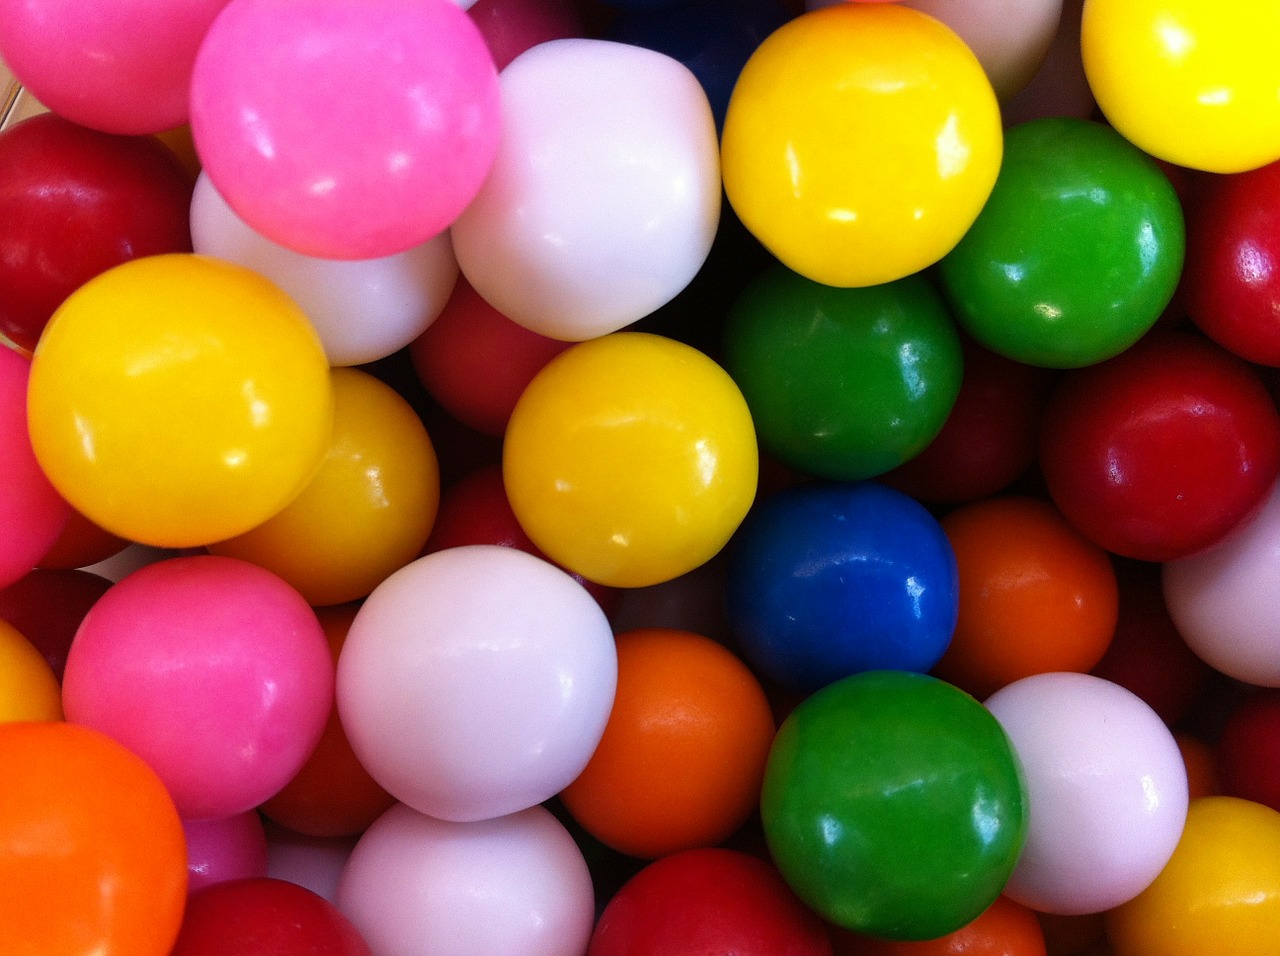 candy gum background free photo